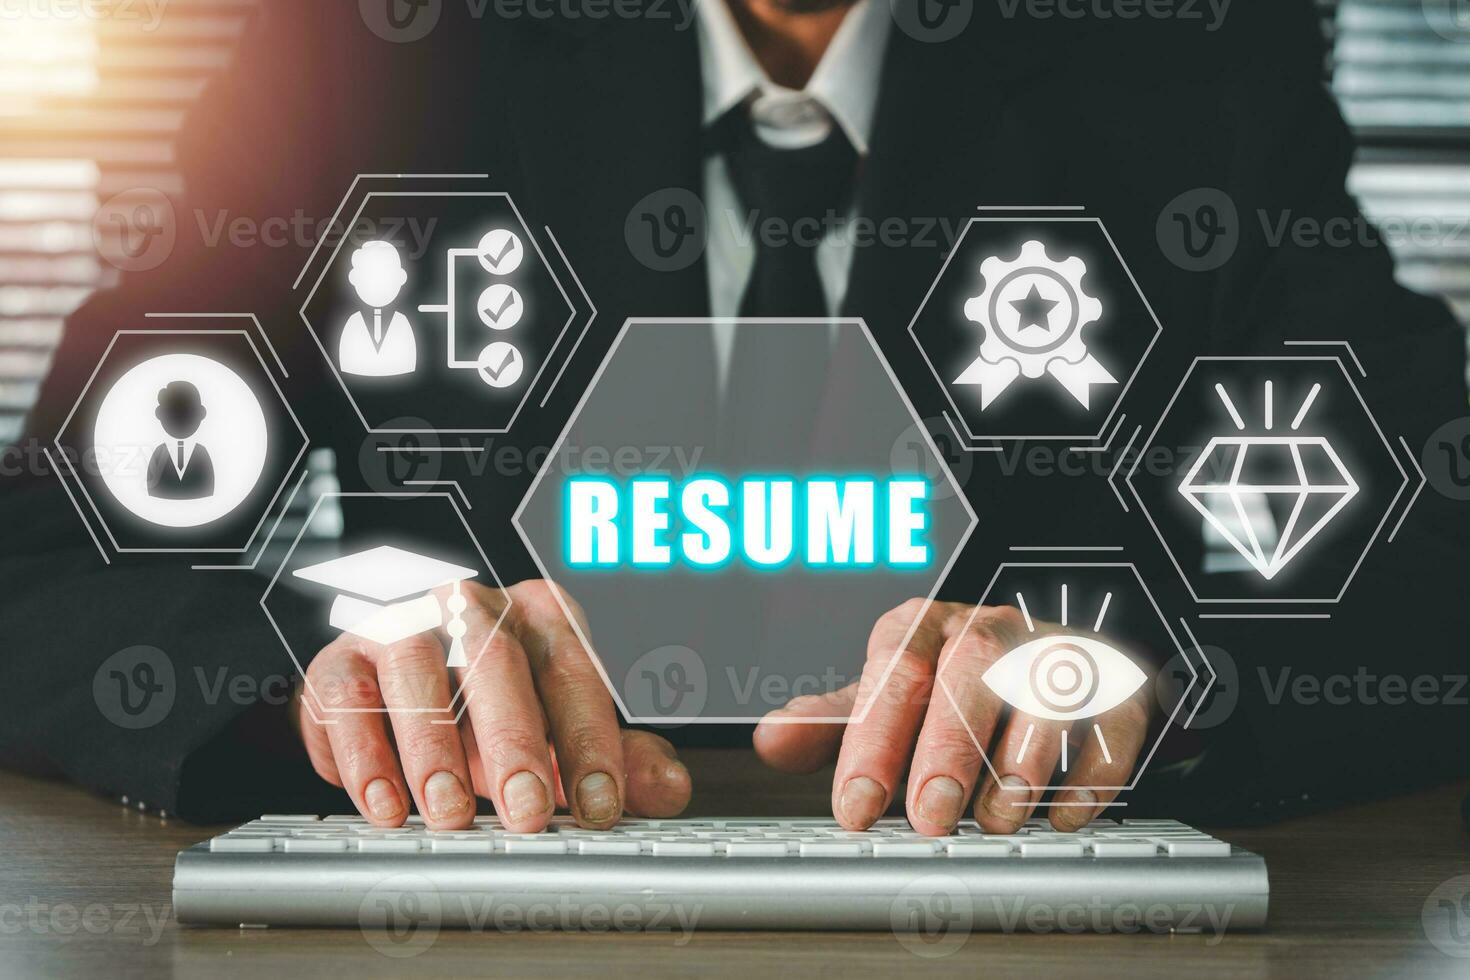 Resume concept, Businessman typing on keyboard computer with resume icon on virtual screen. photo